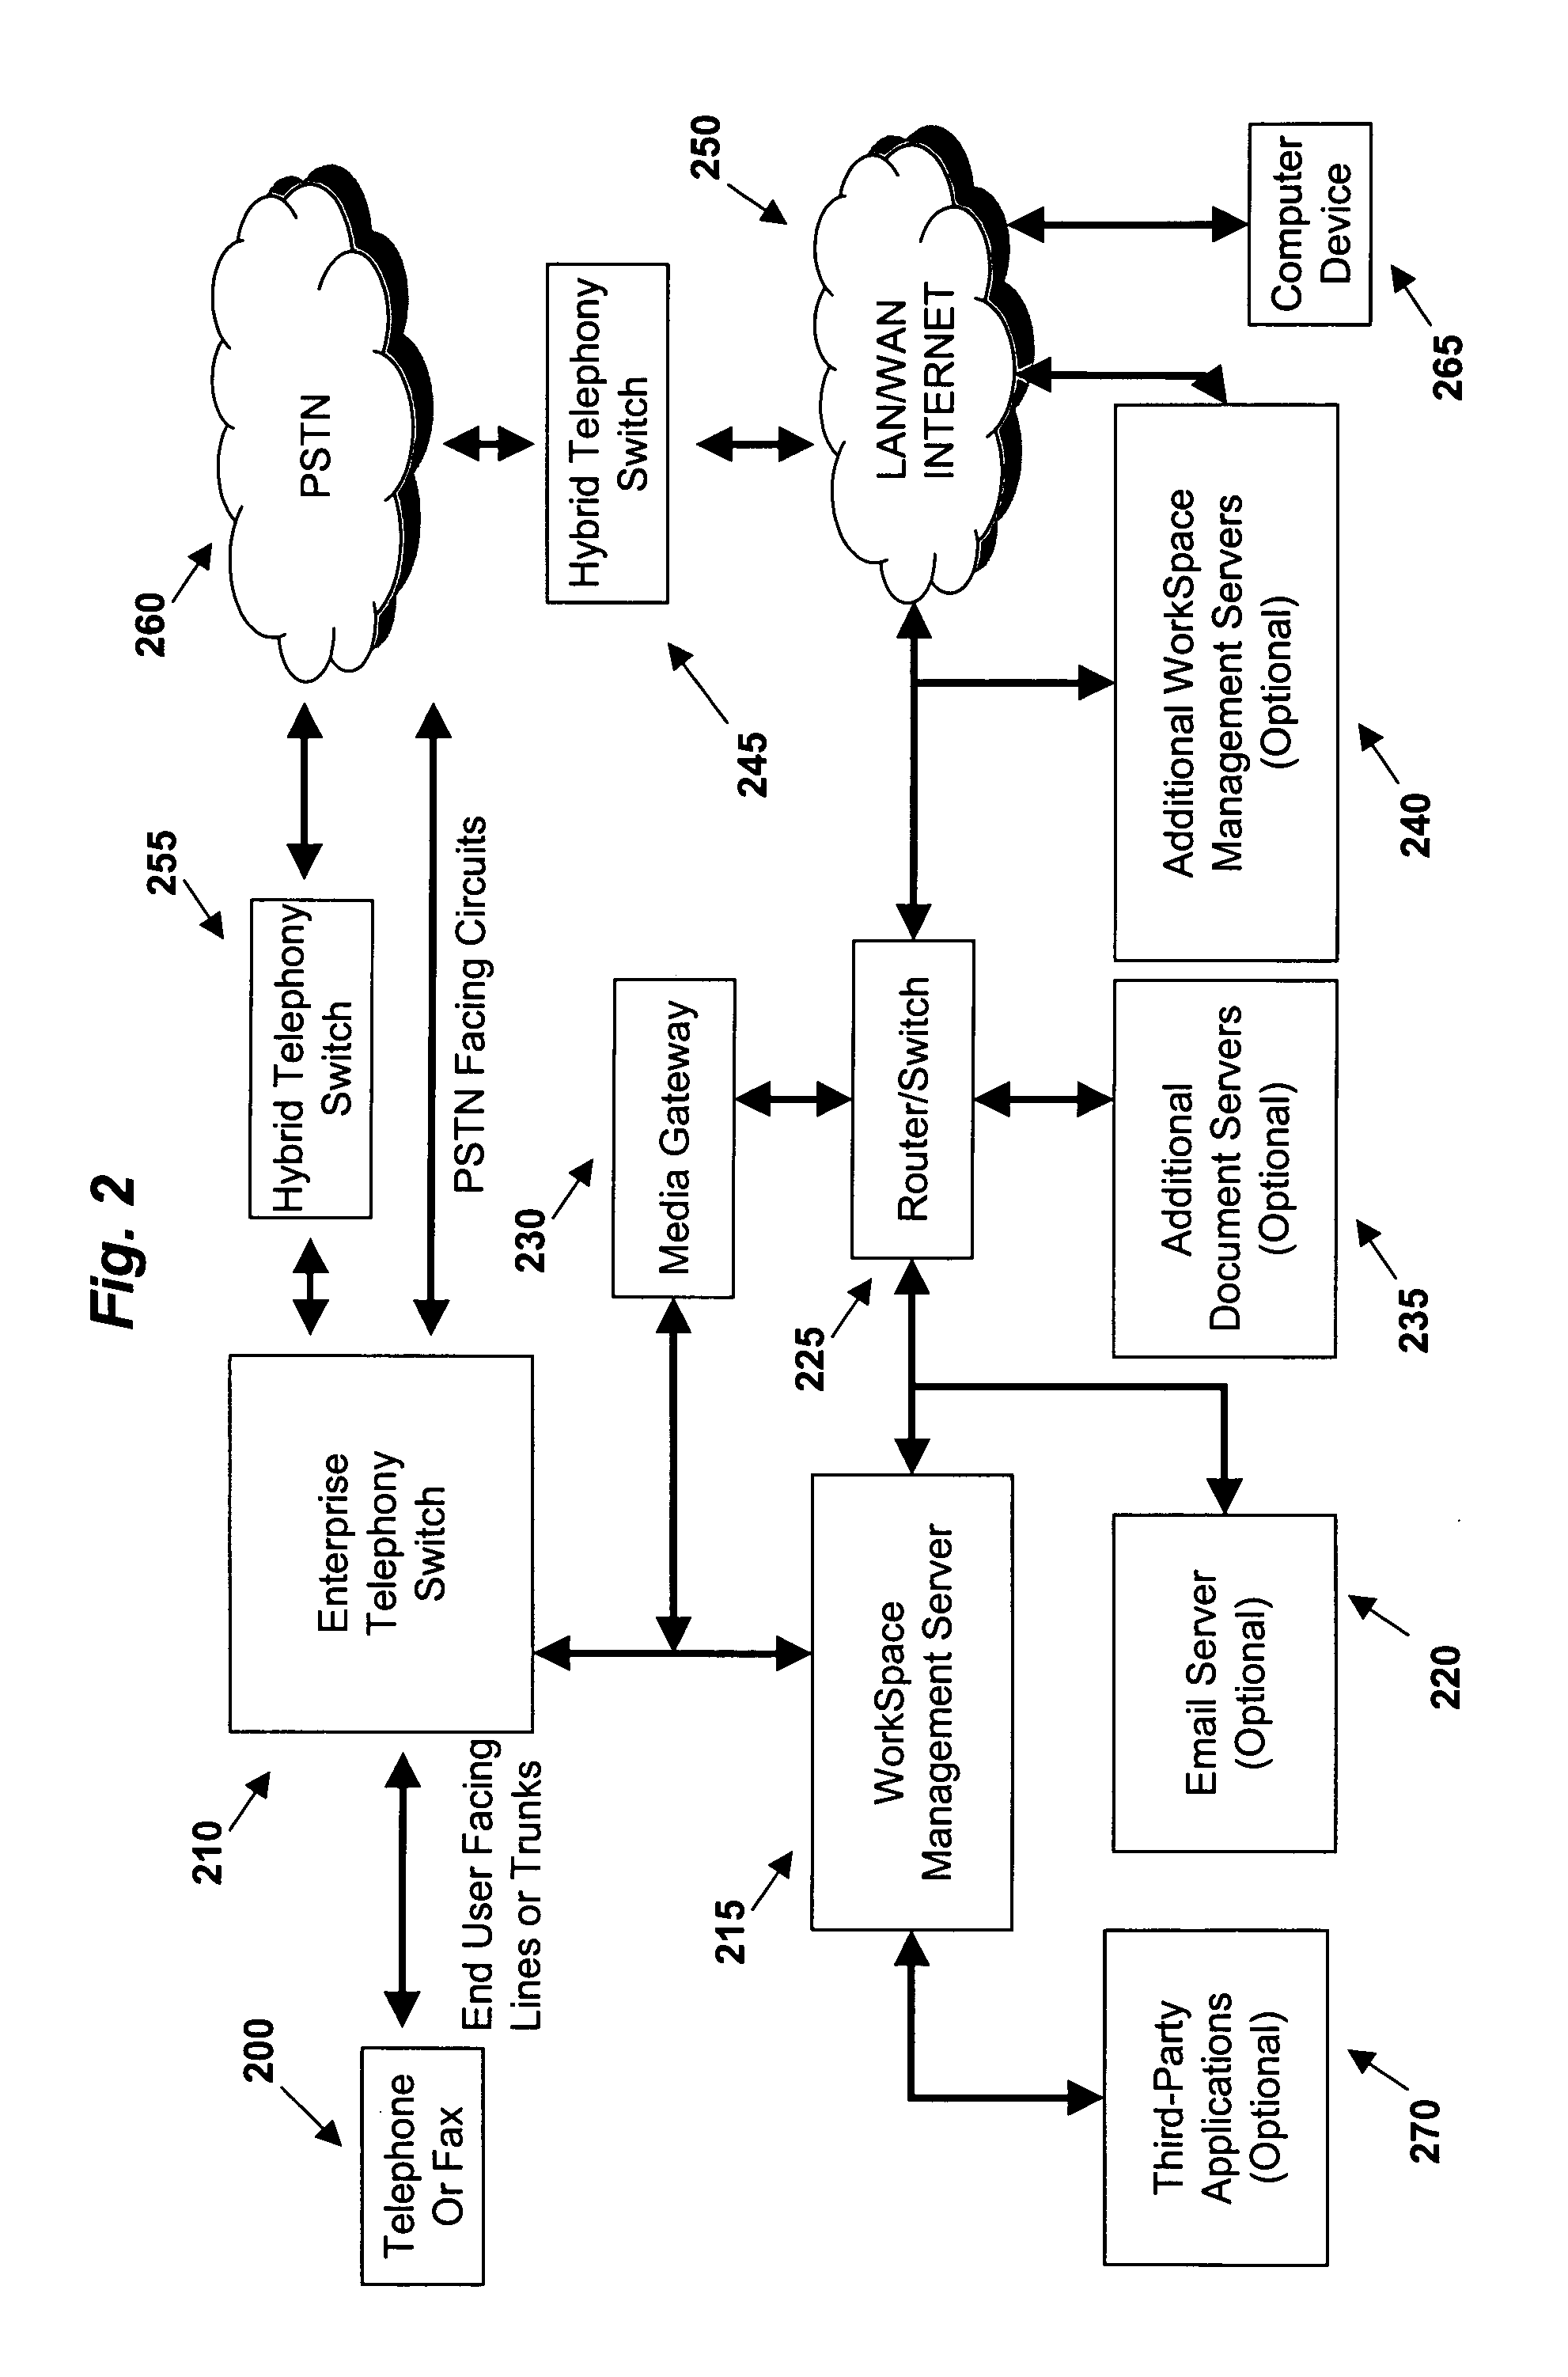 System and method for advanced rule creation and management within an integrated virtual workspace